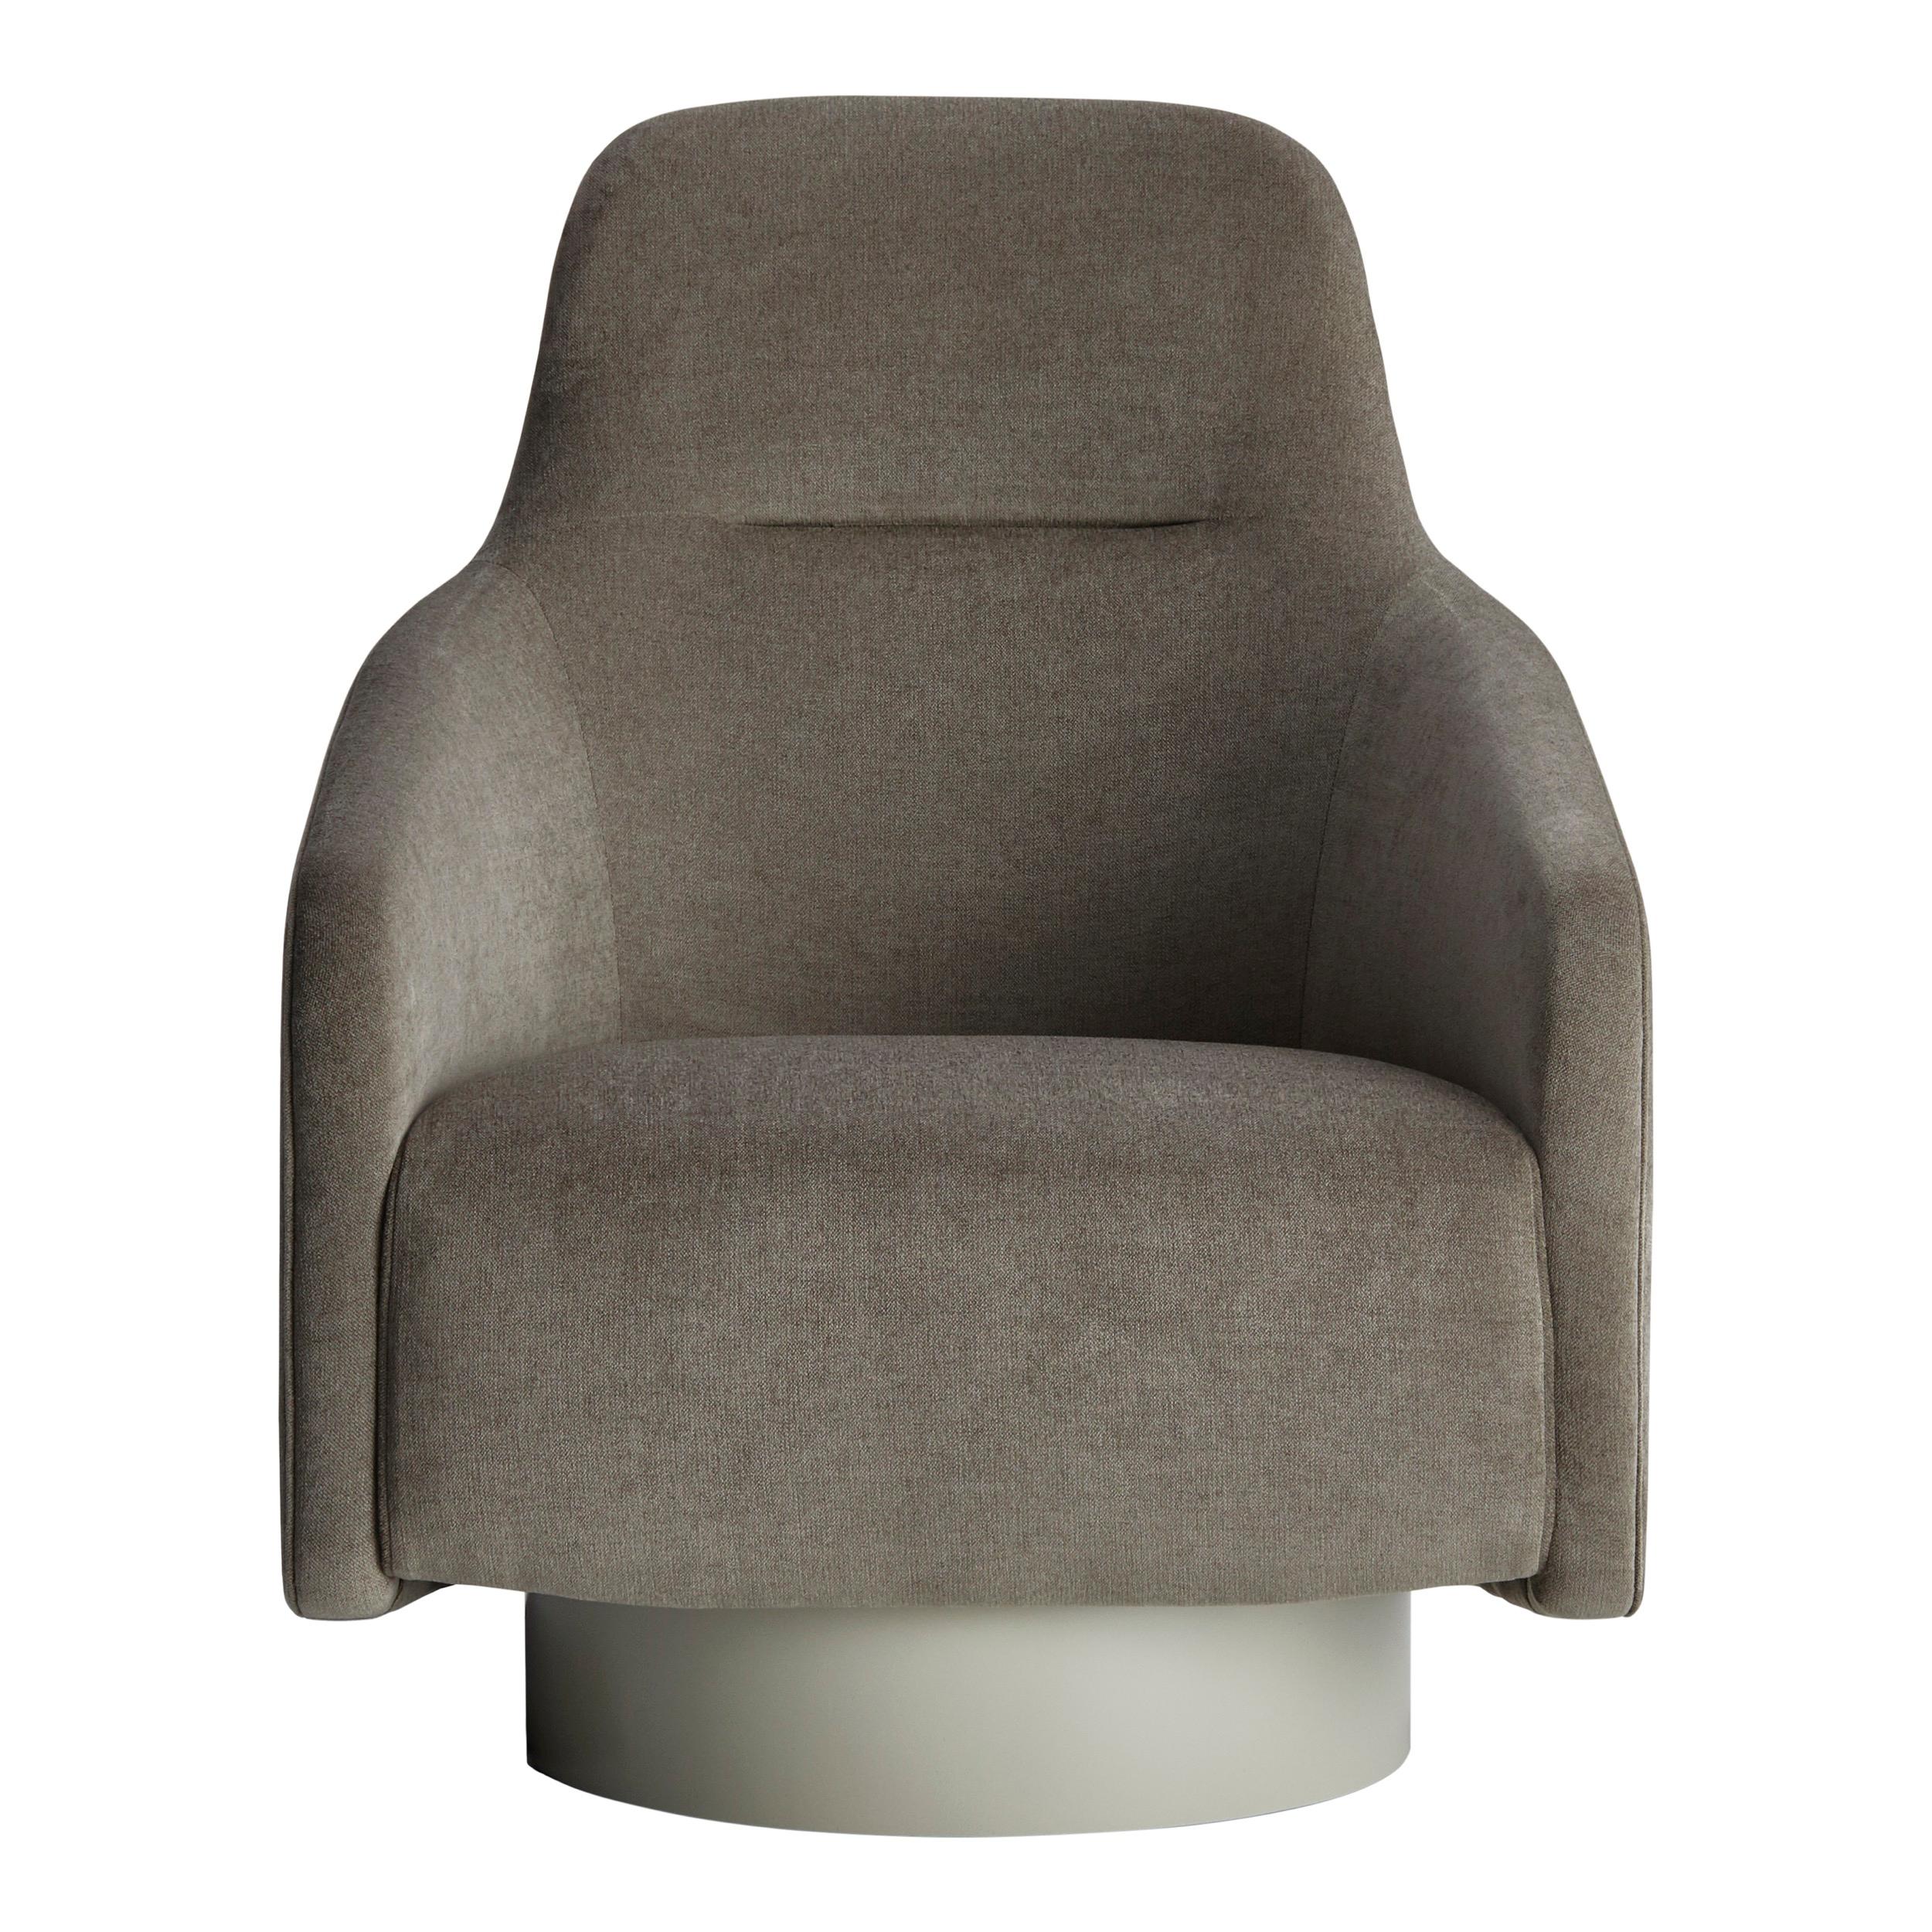 With a sophisticated and modern design, our Boémia II Swivel armchair is a must-have for your living room. High-back designed for more comfort.

Upholstered with resistance 04 taupe and matte lacquered base in 2005-Y20R color.